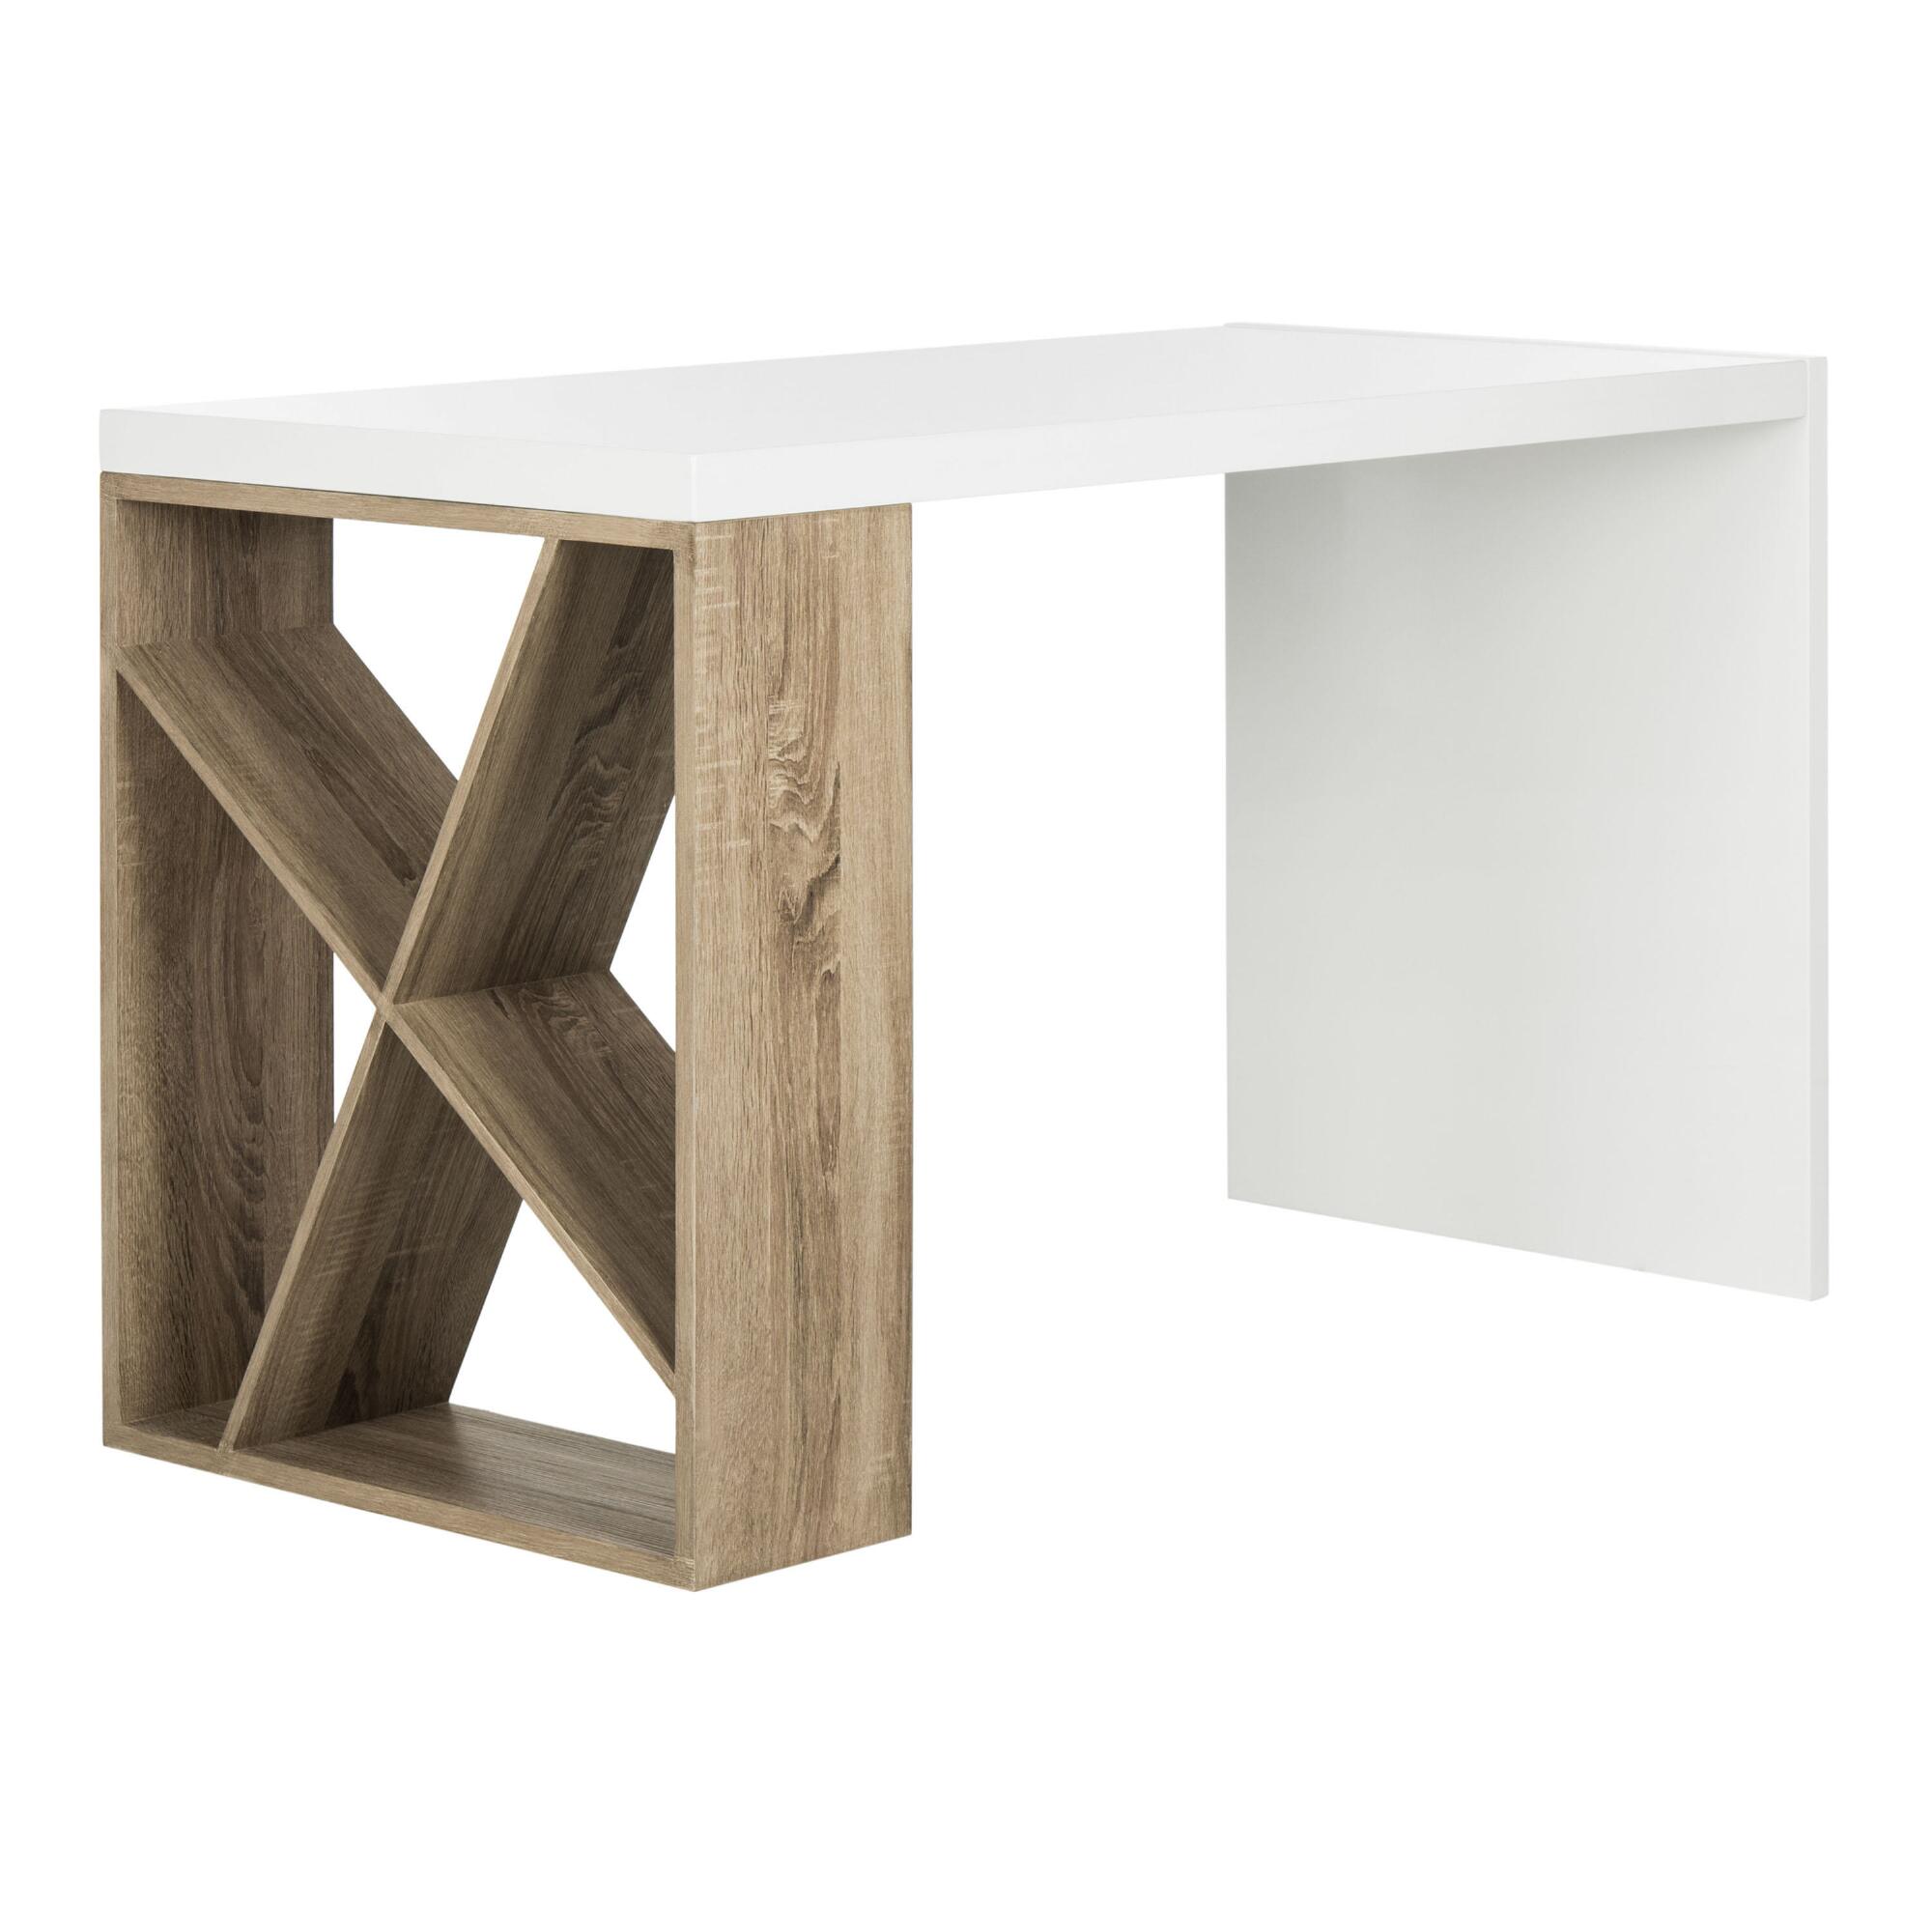 White and Gray Wood Whitney Desk with Side Storage: Brown/White by World Market